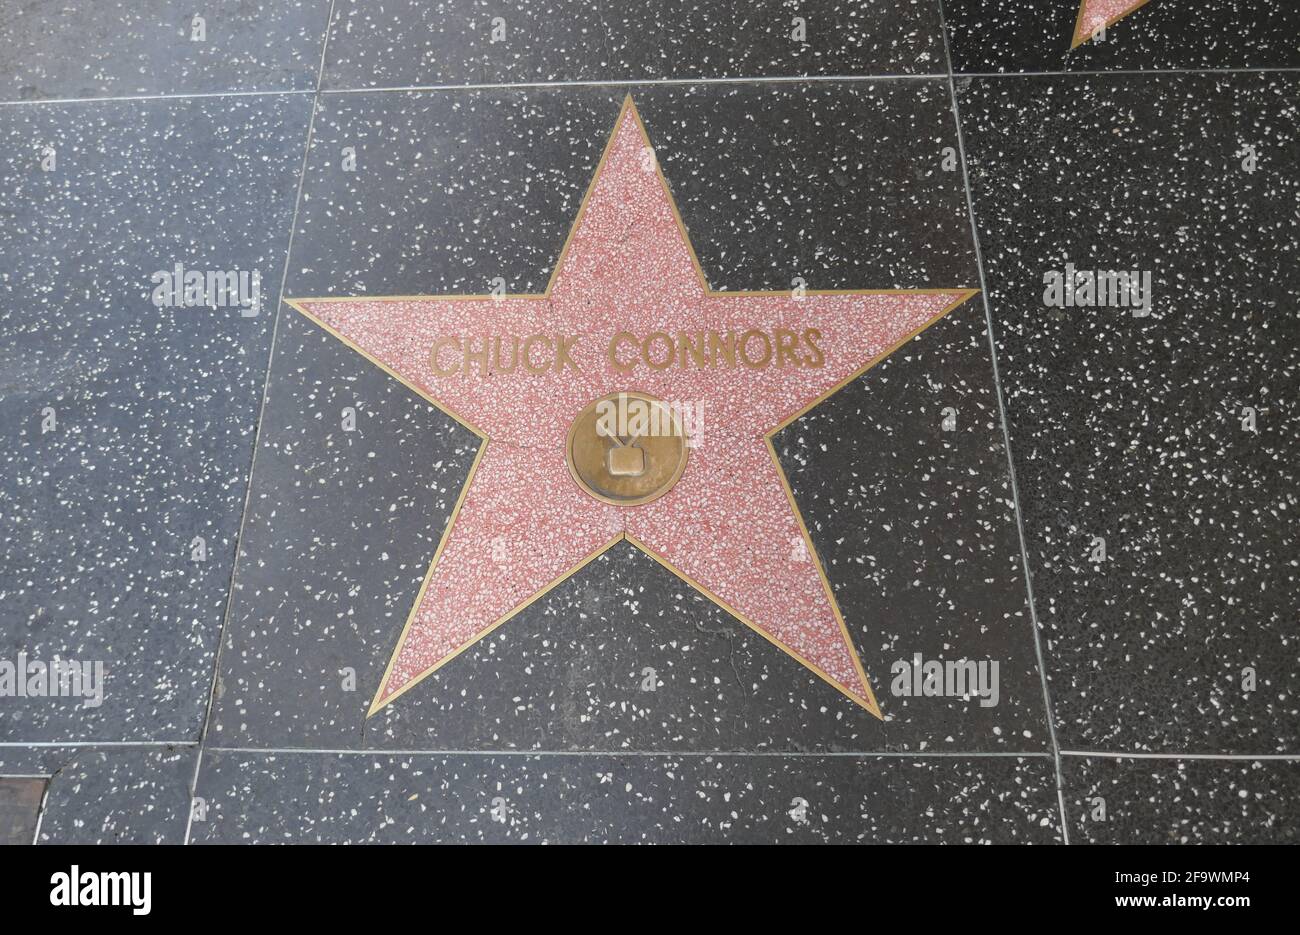 Hollywood, California, USA 17th April 2021 A general view of atmosphere of actor Chuck Connors Star on the Hollywood Walk of Fame on April 17, 2021 in Hollywood, California, USA. Photo by Barry King/Alamy Stock Photo Stock Photo